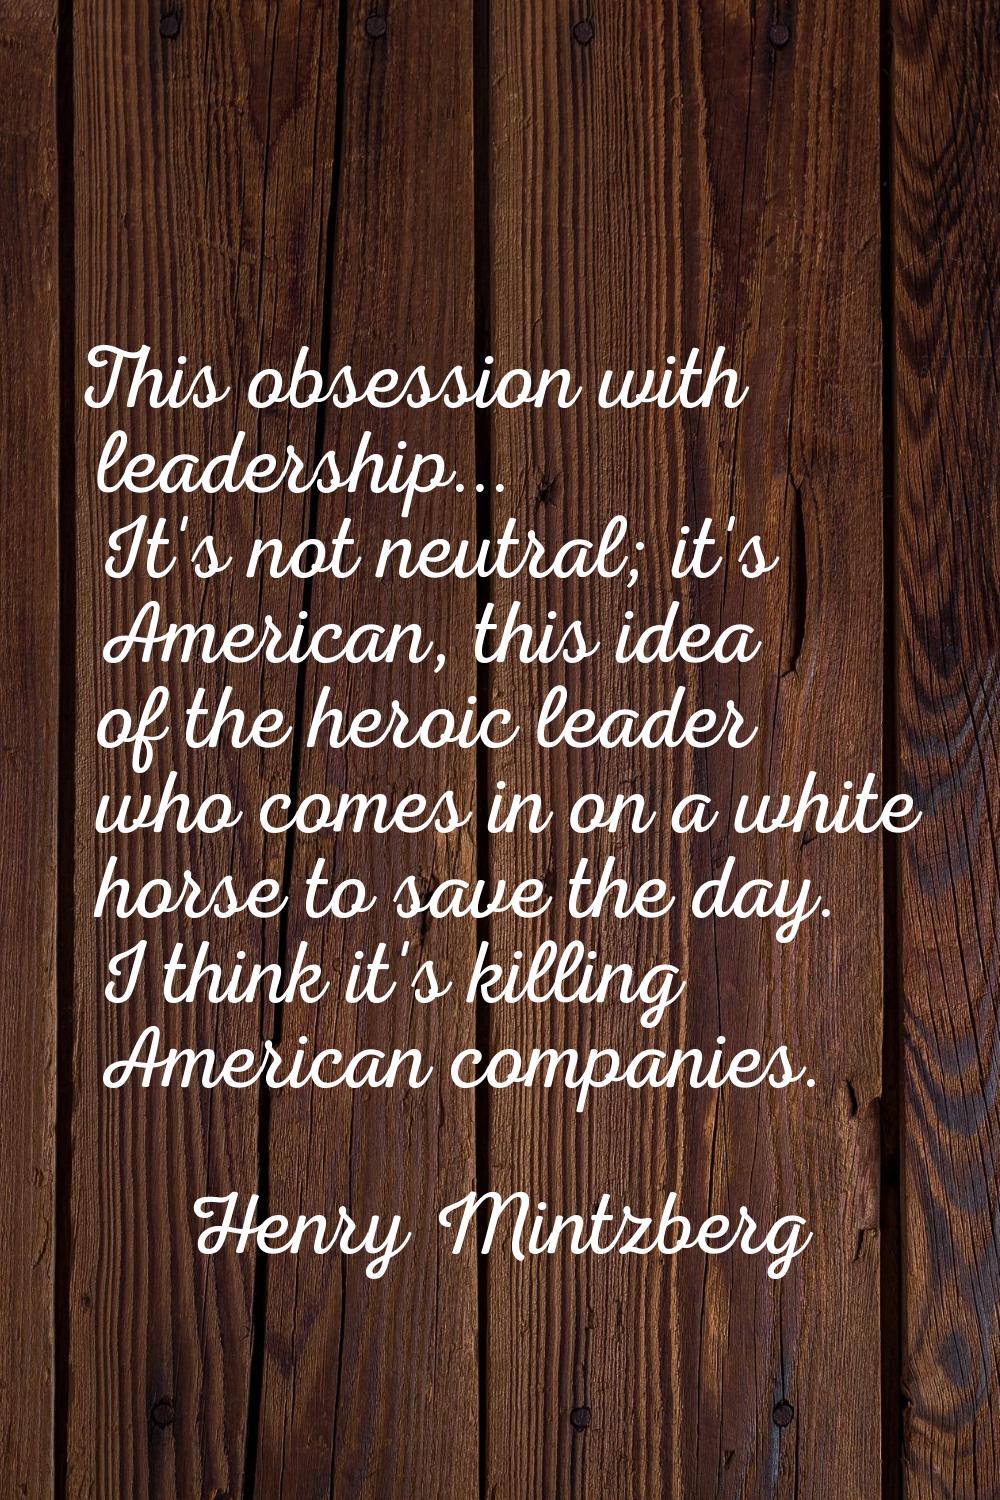 This obsession with leadership... It's not neutral; it's American, this idea of the heroic leader w